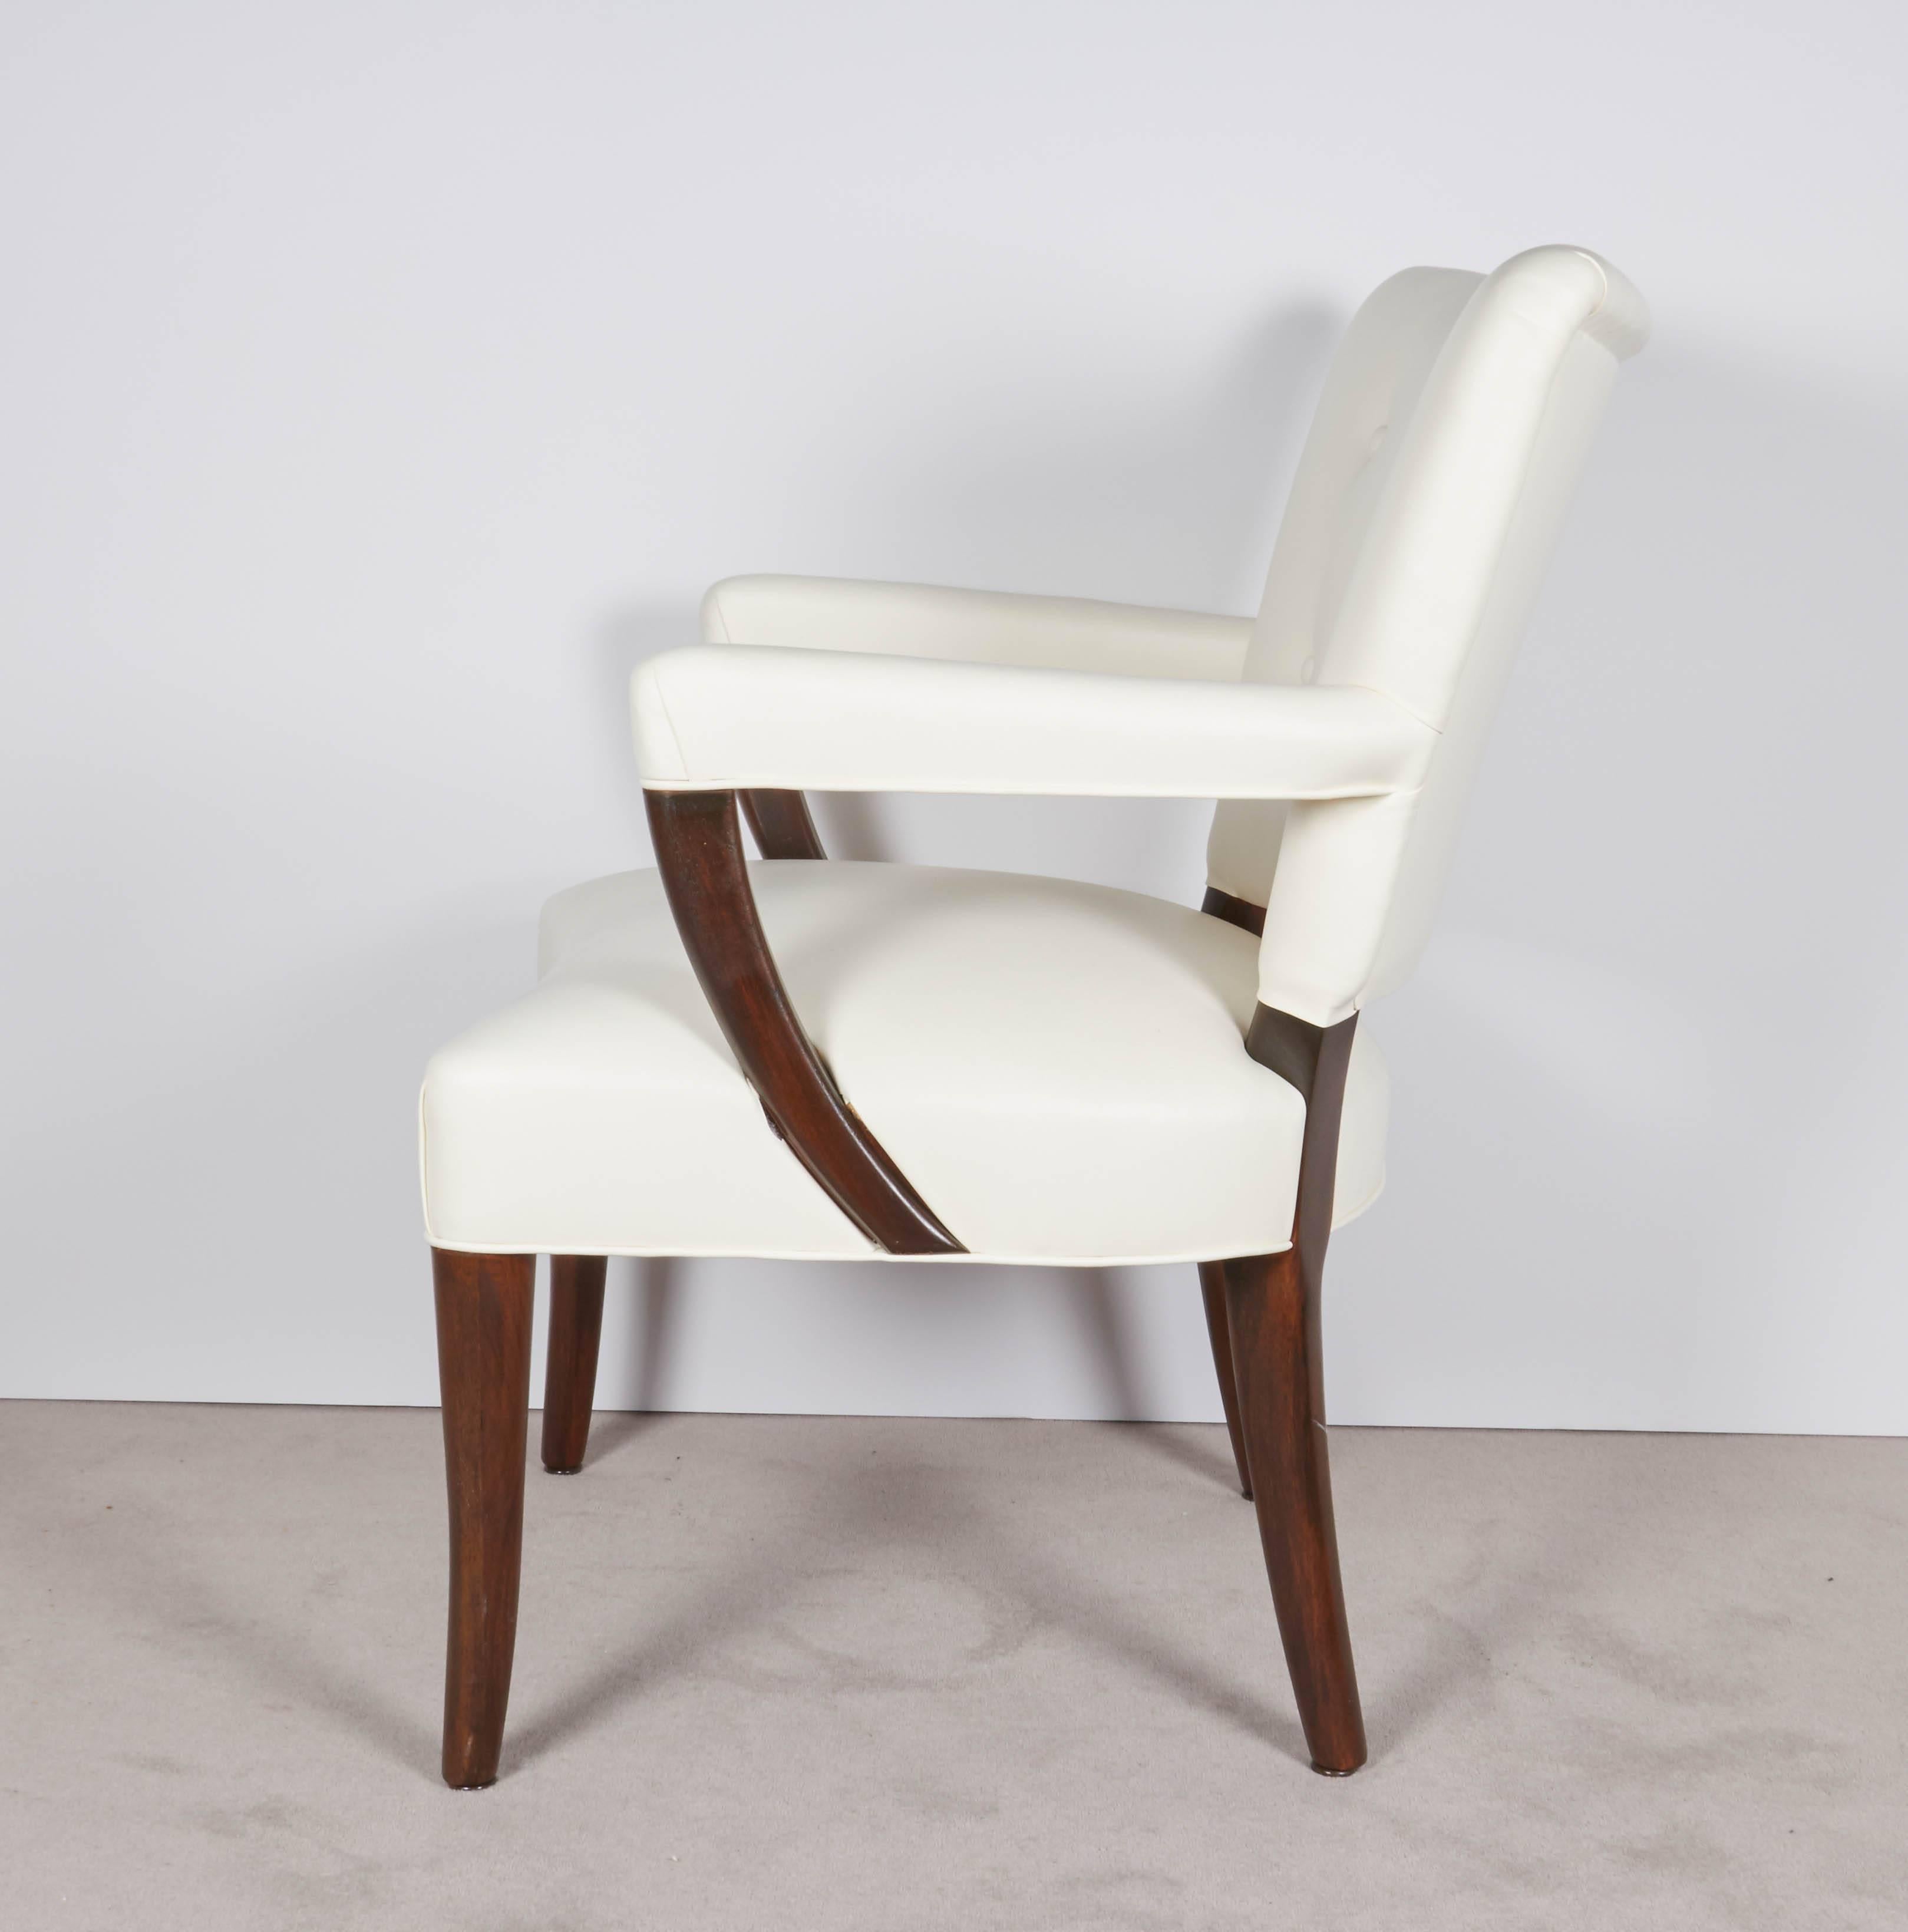 A substantial pair of game and armchairs, produced circa 1940s by the Stow-Davis Furniture Company of Grand Rapids, Michigan, following the style of designer Osvaldo Borsani, with tufted back, arm rests and seat upholstered in white leather, against